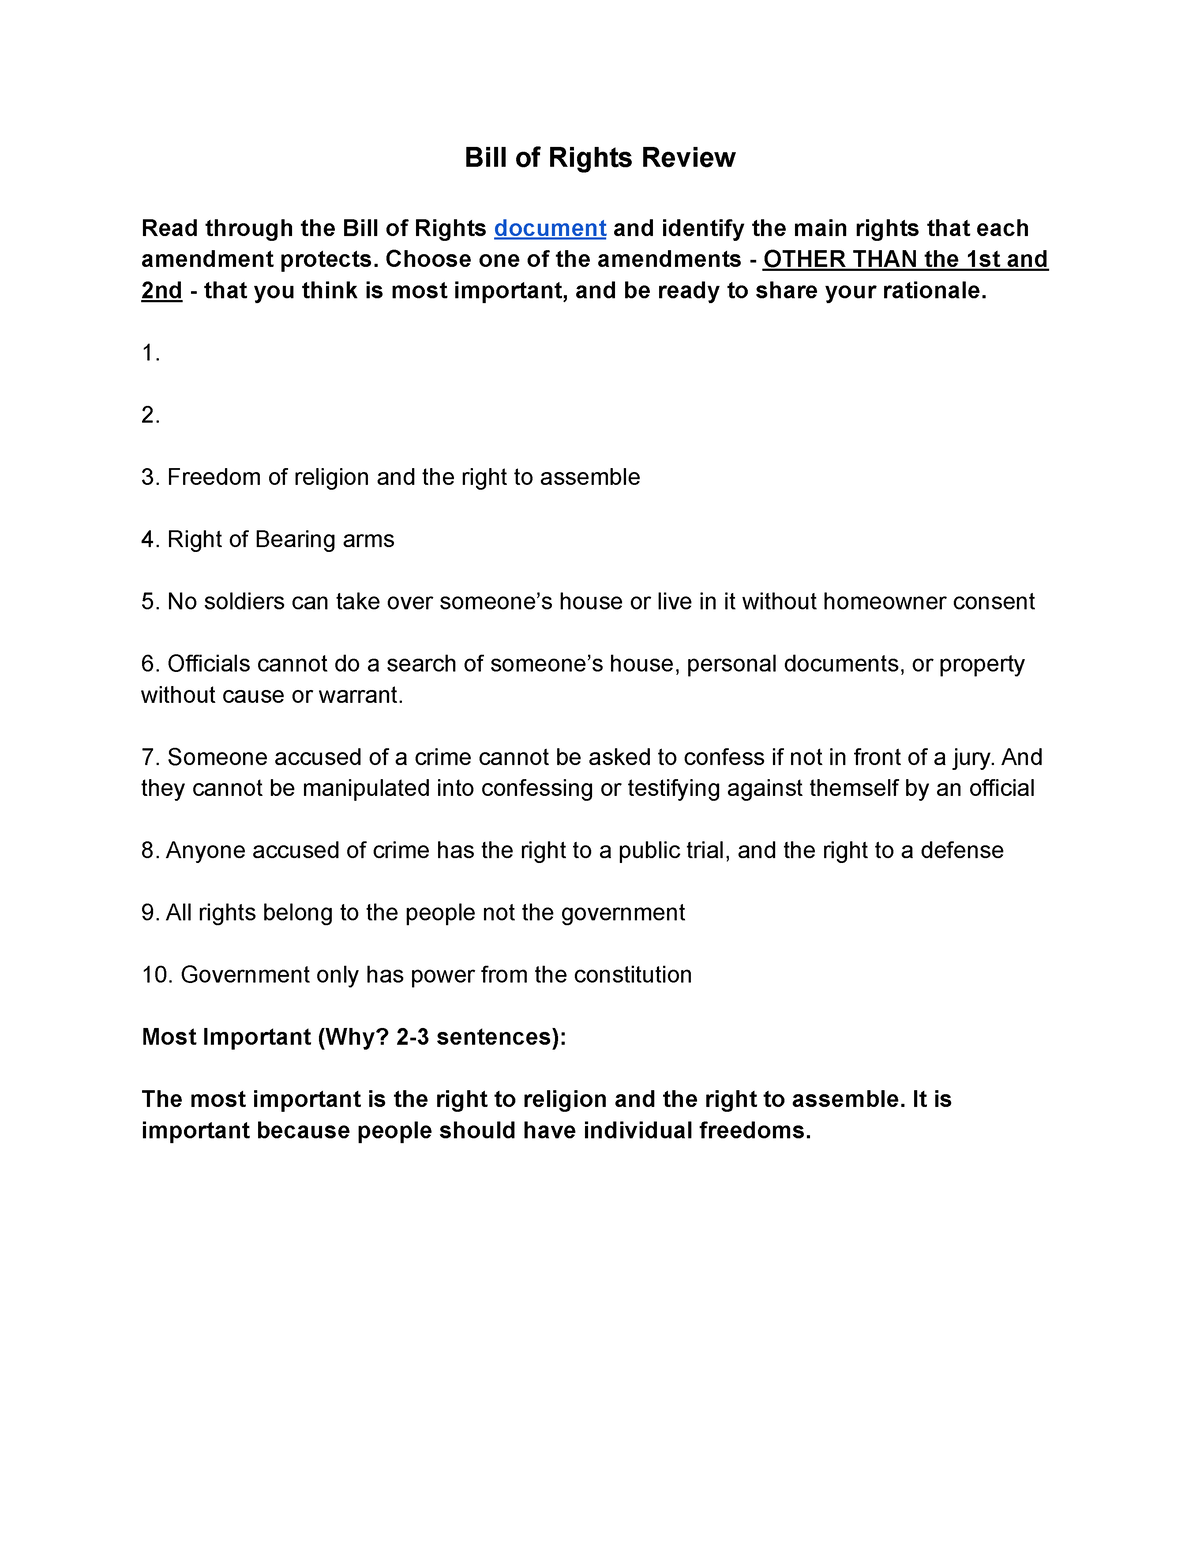 copy-of-bill-of-rights-review-bill-of-rights-review-read-through-the